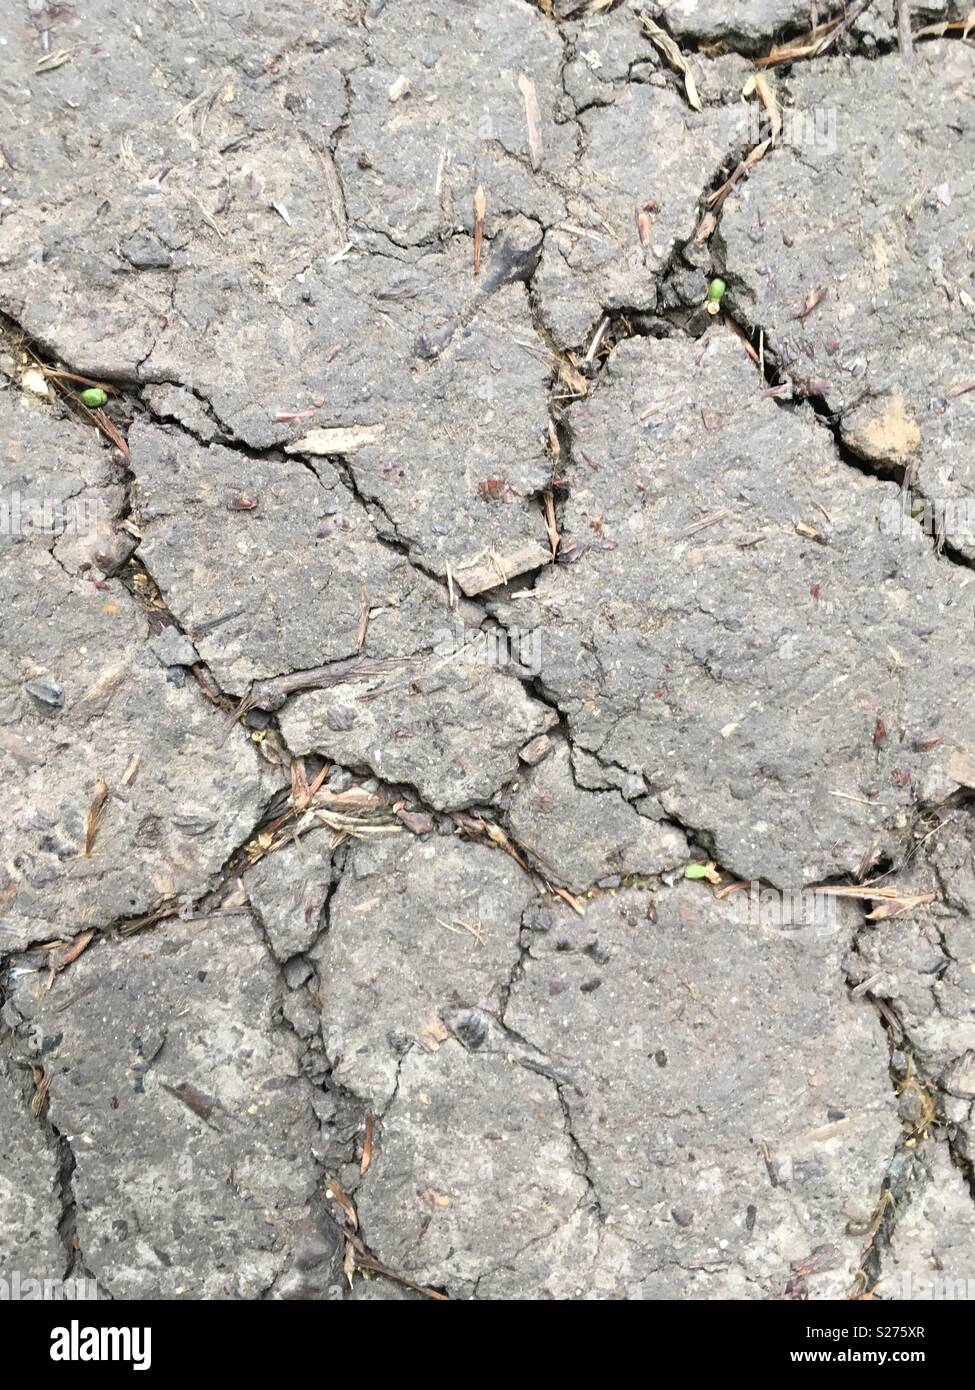 Cracked soil from heatwave Stock Photo